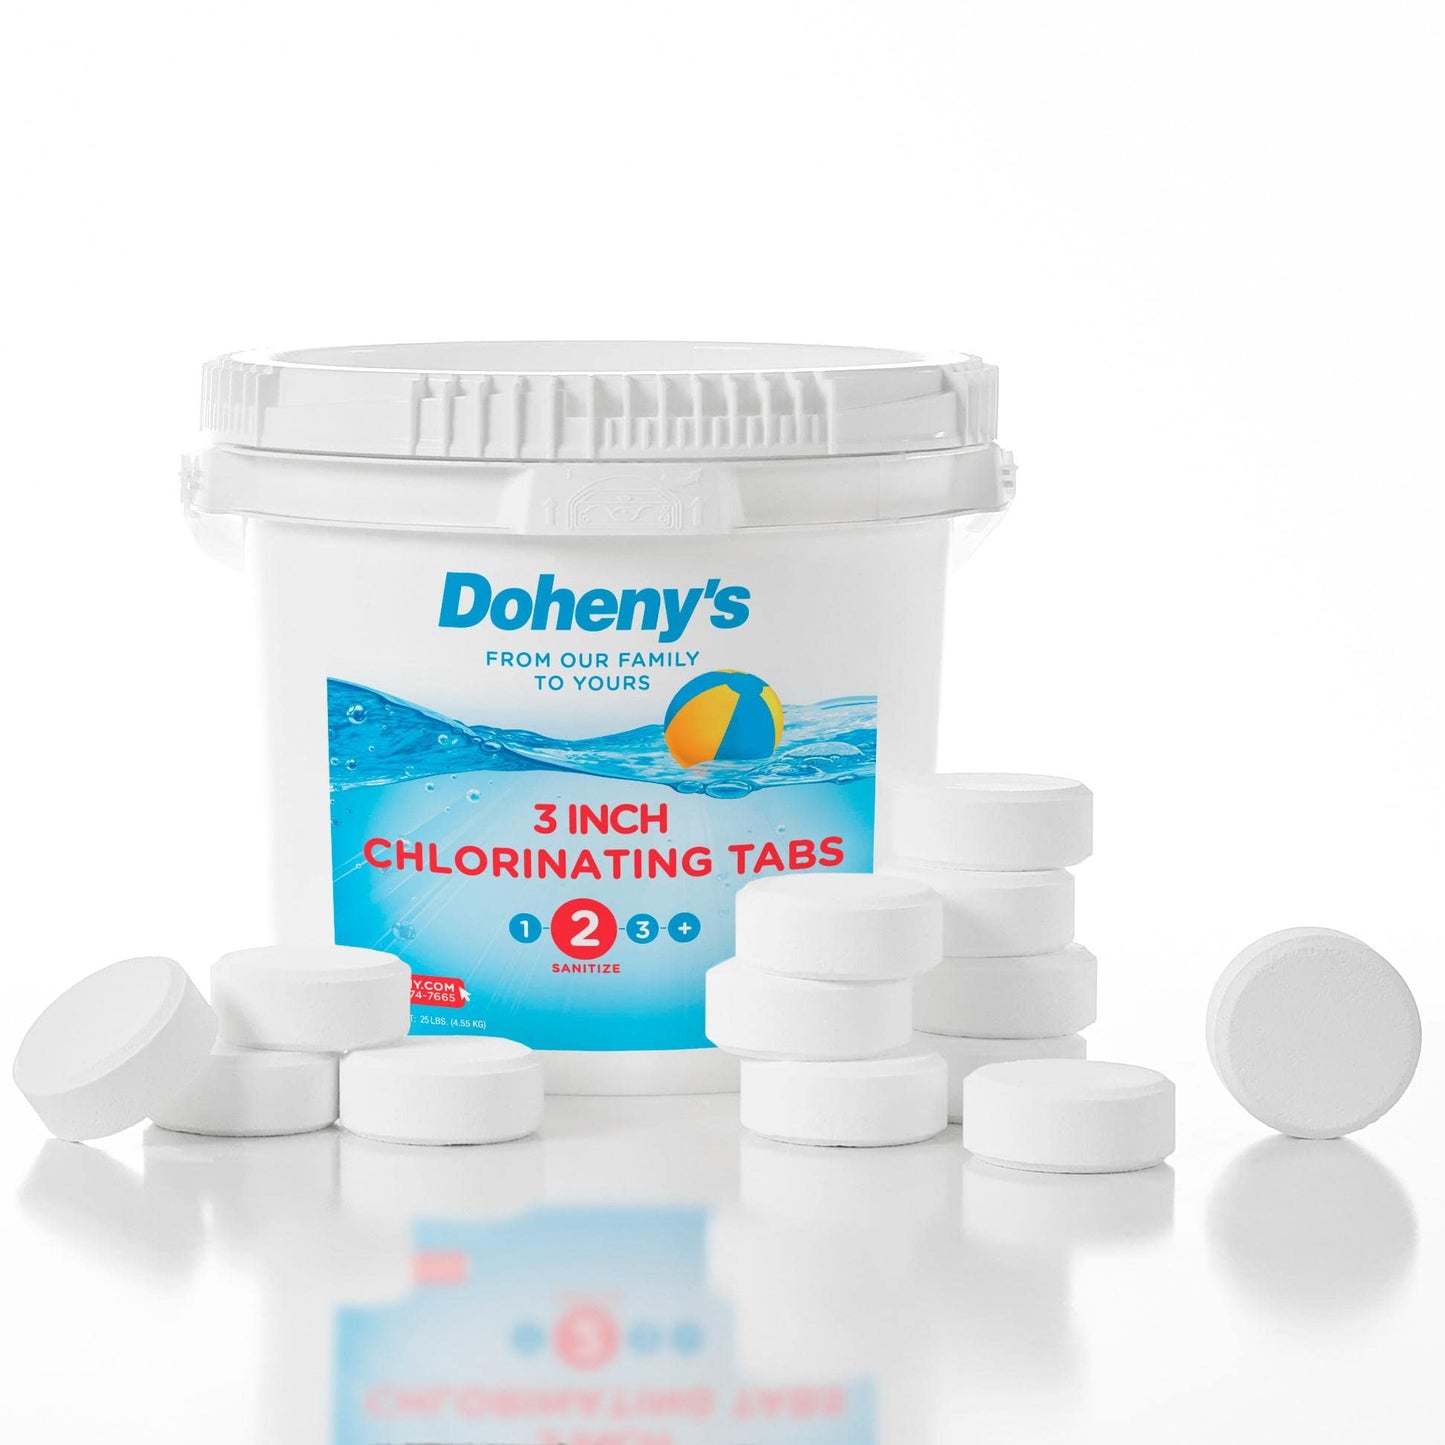 Doheny's 3 Inch Swimming Pool Chlorine Tablets | Pro-Grade Pool Sanitizer | Long Lasting & Slow Dissolving | Individually Wrapped | 99% Active Ingredient, 90% Stabilized Chlorine | 25 LB Bucket 25 lb.